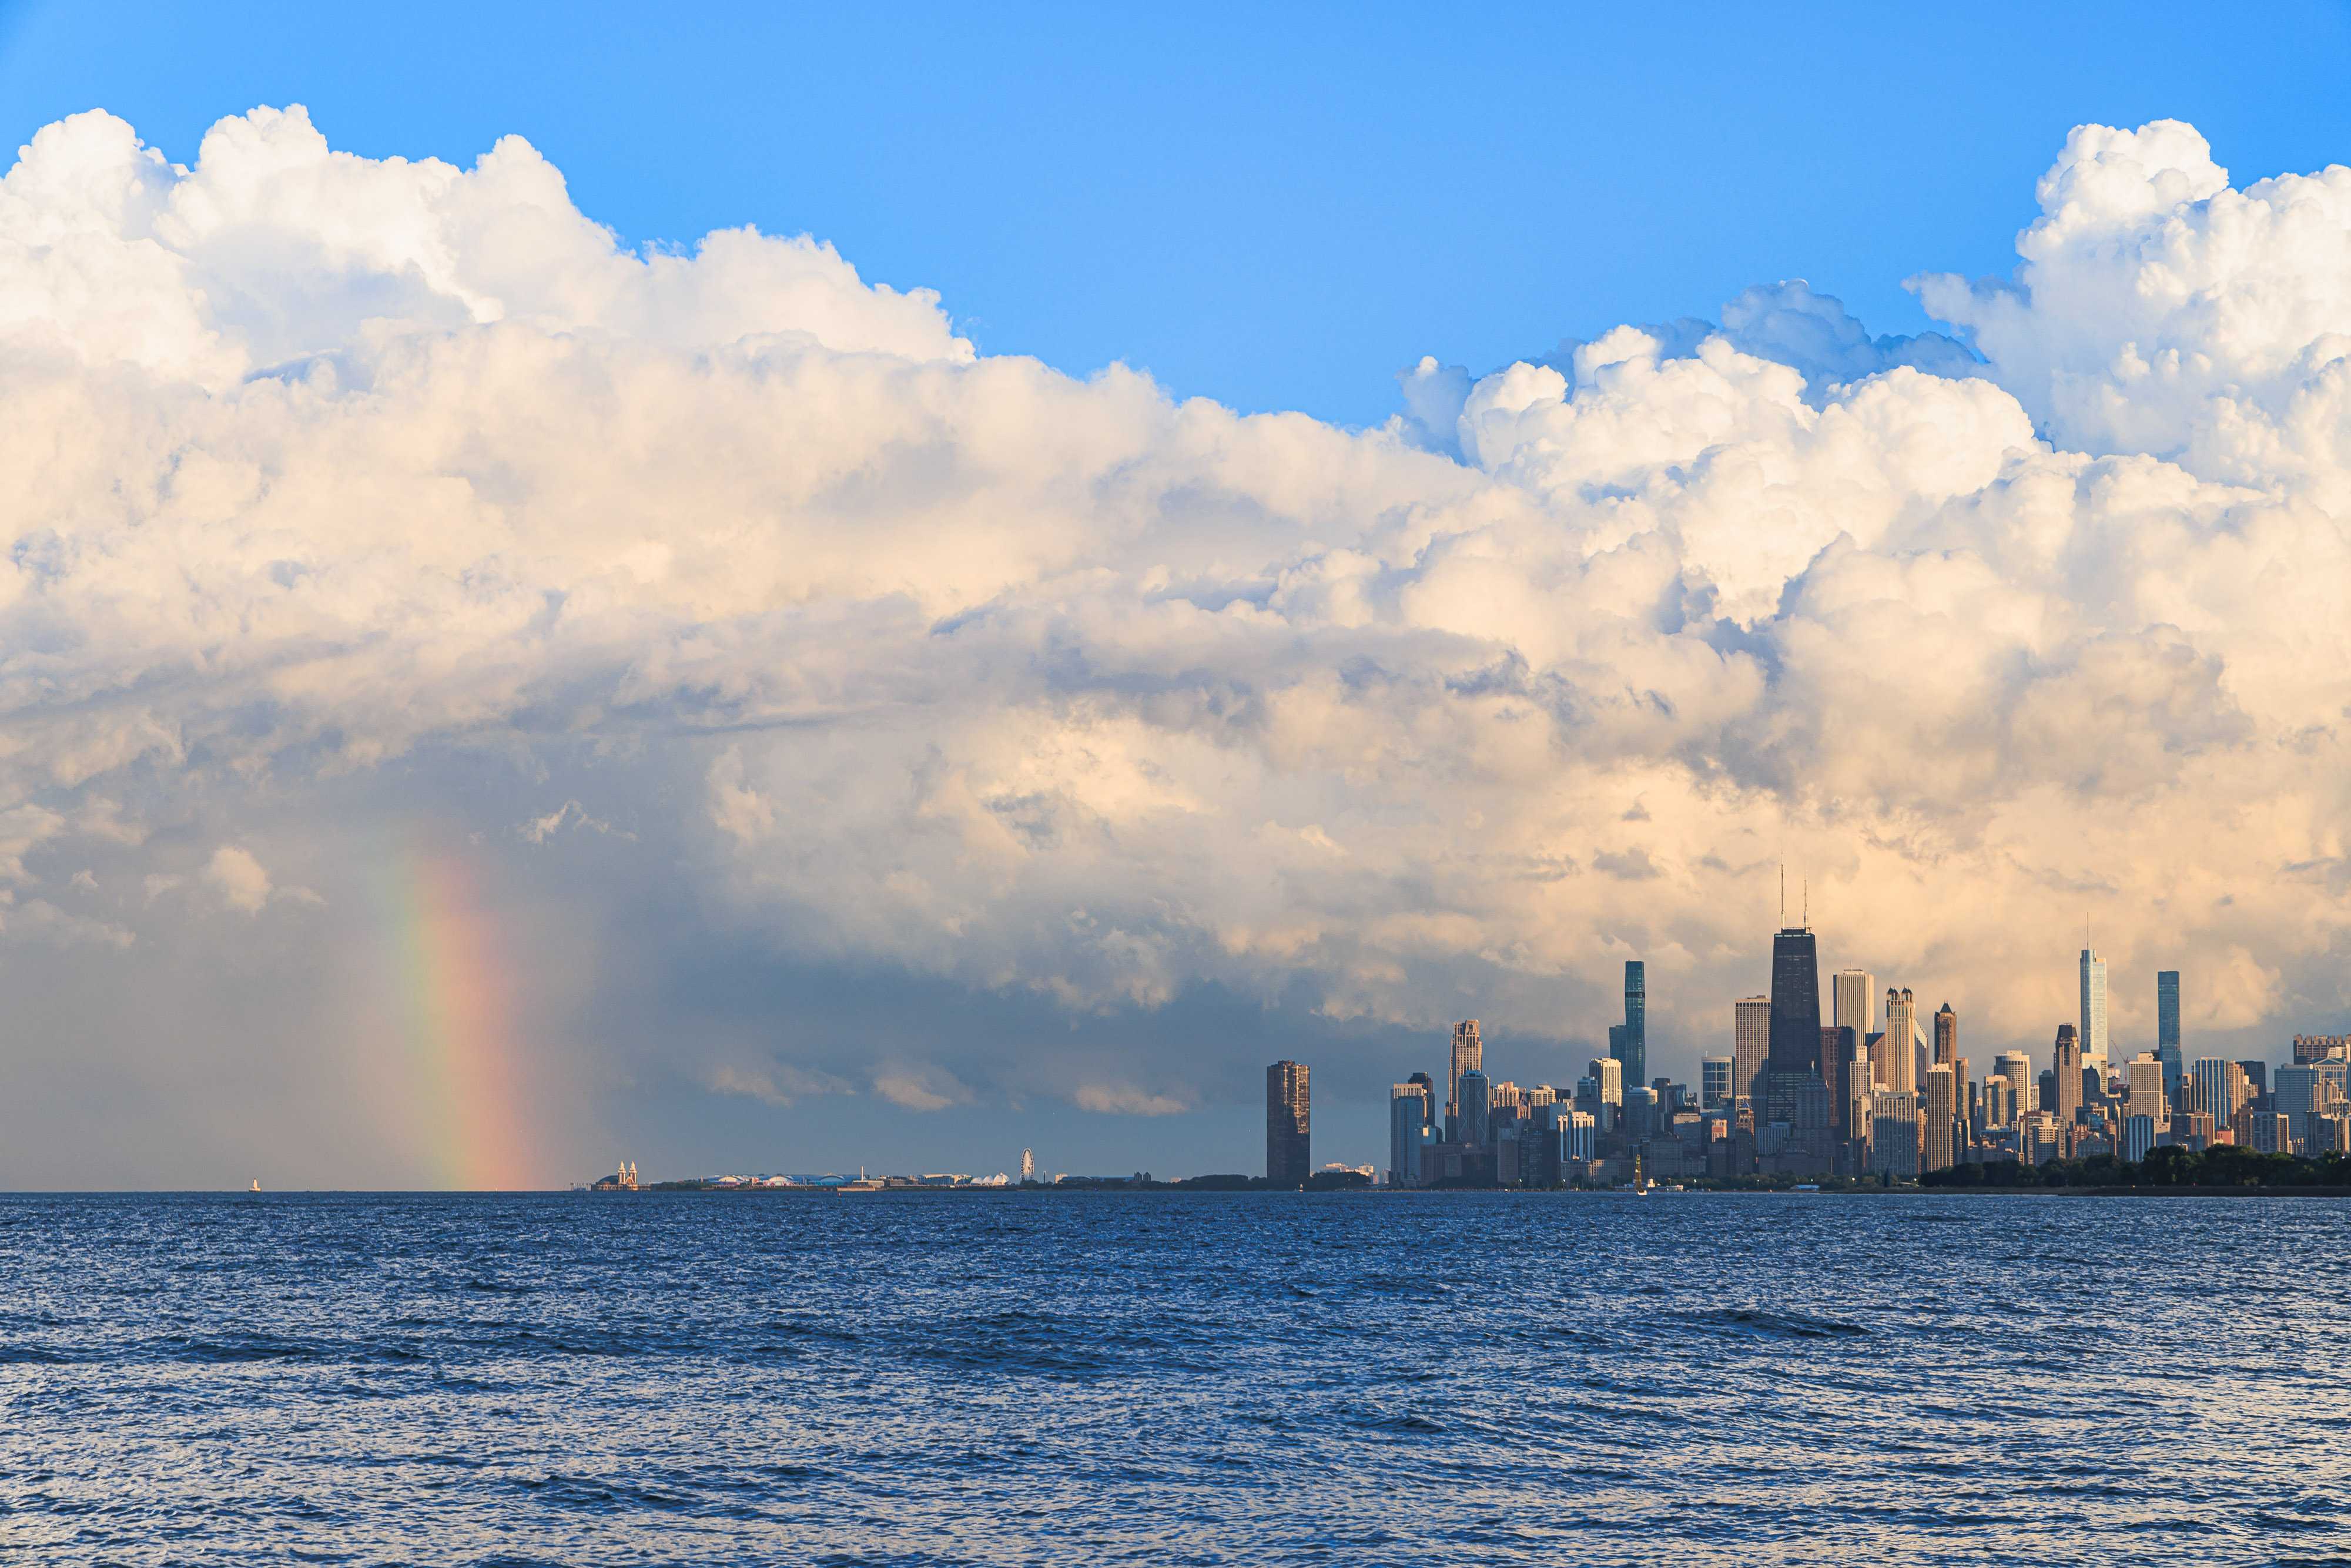 Elaborately twisted storm clouds tower the city skyline, which is set to the right of the image seemingly rising from the choppy waters of Lake Michigan. The city is lit brightly, as the dark clouds of a storm blow away to reveal a sunny day. To the left of the image, a bright rainbow shines.